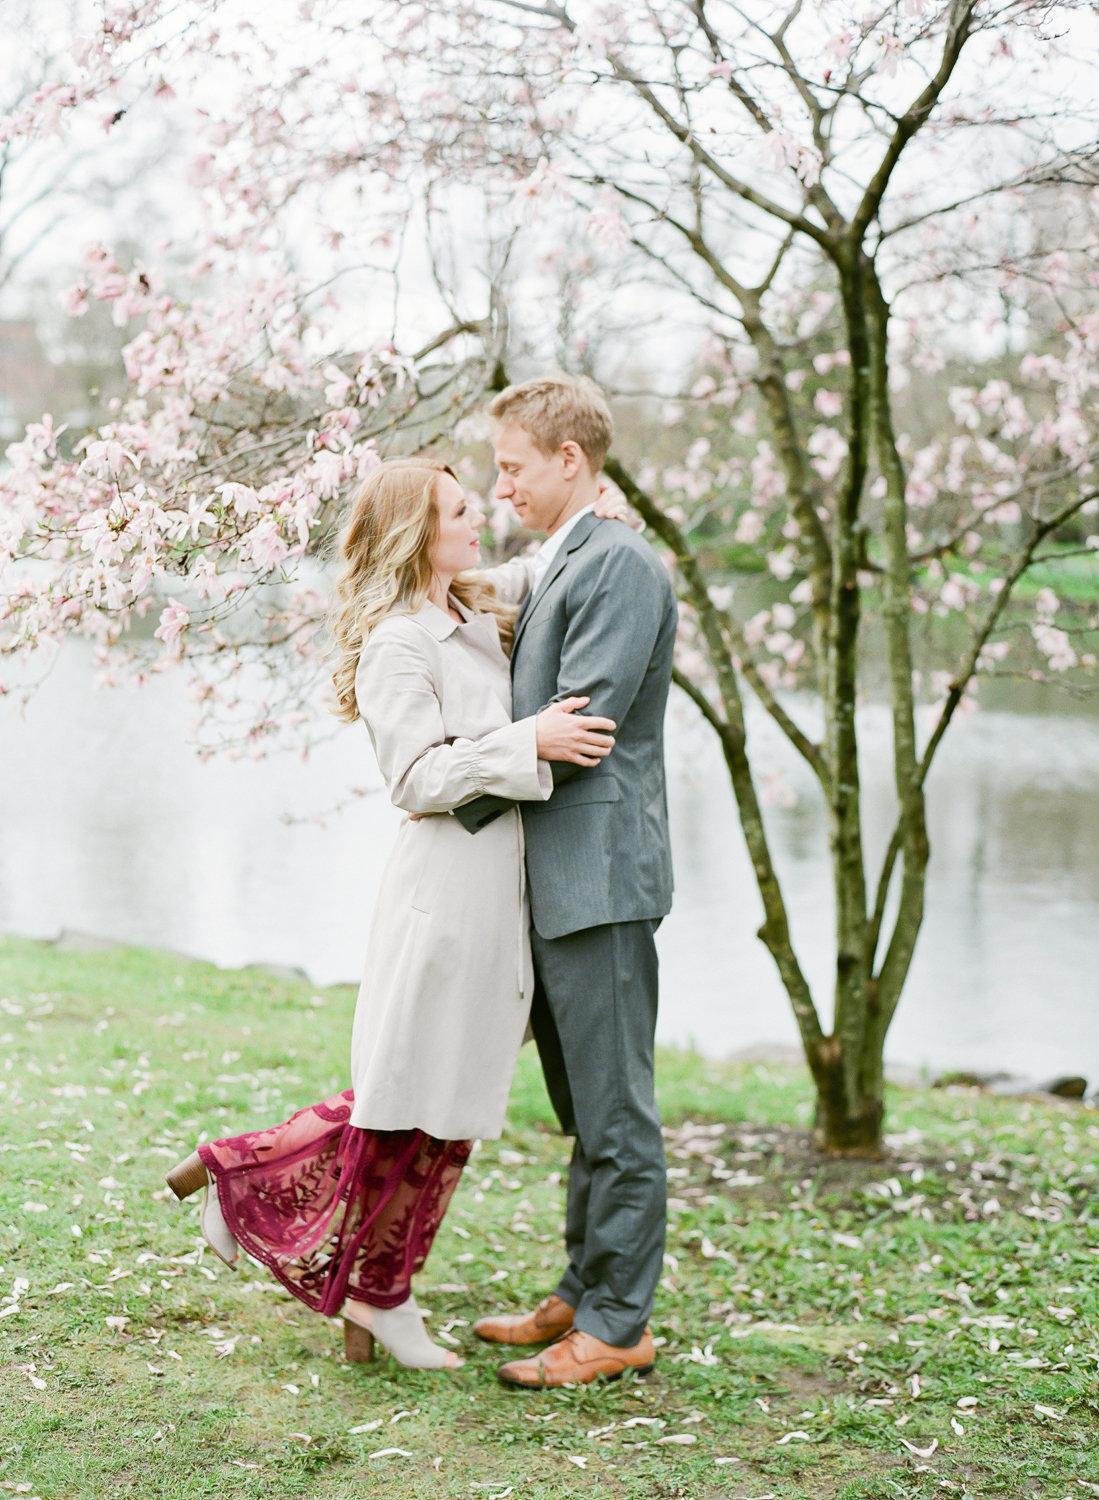 Jacqueline Anne Photography - Amanda and Brent-62